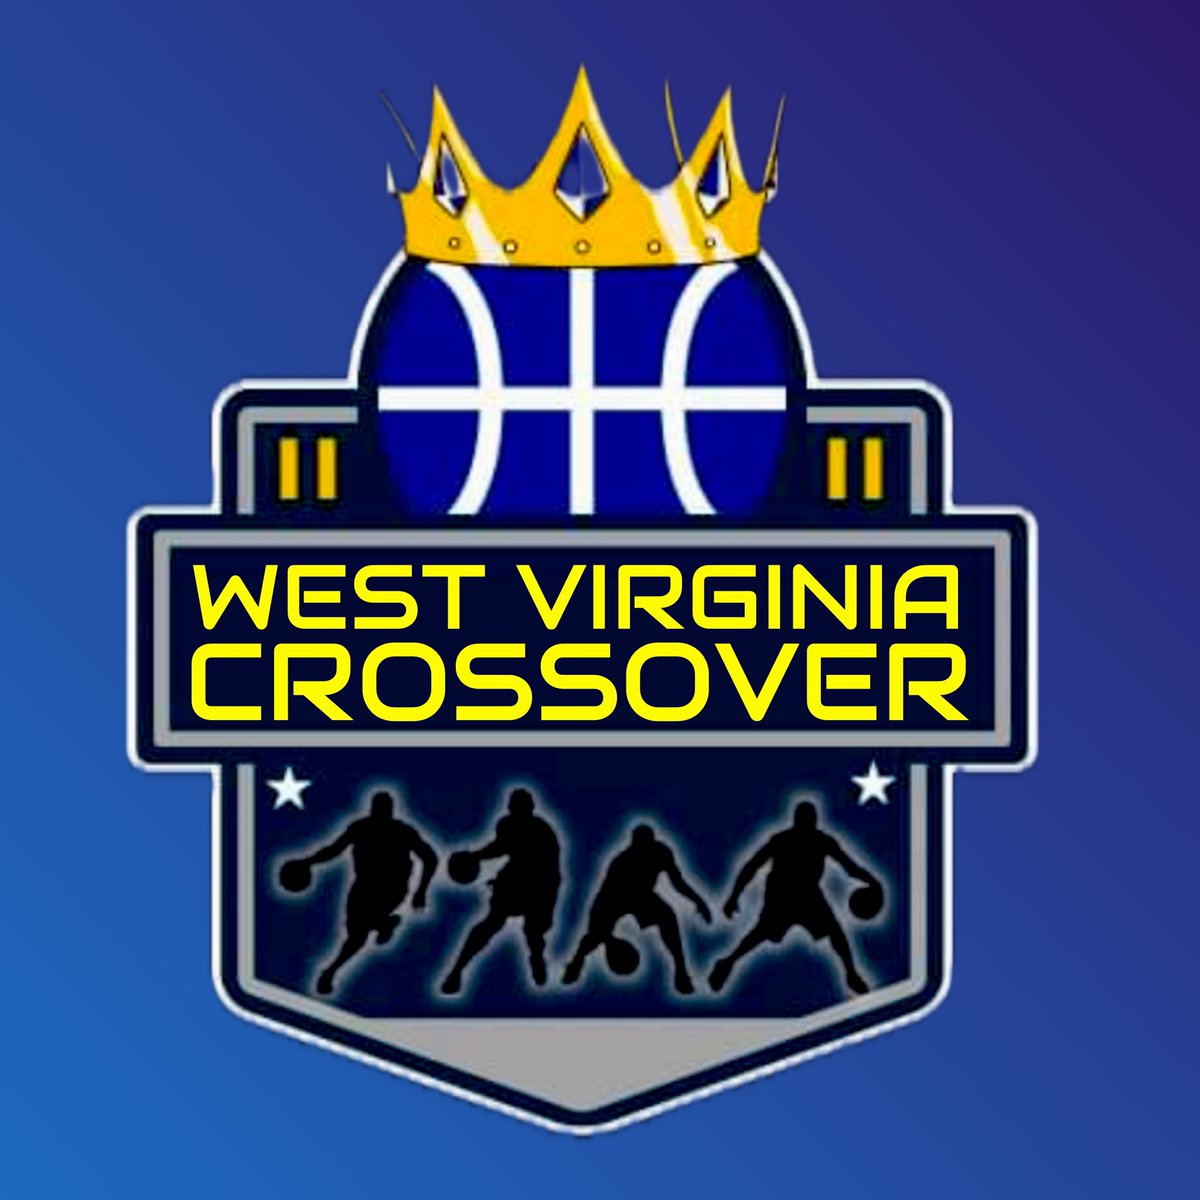 🚨🚨 ALL 2025/2026s 

Tuesday 5/7/24 @6:30PM. WVCB will be holding workouts and player evaluations for our final open spot. Direct message or text 304-660-8851 for more details. LETS WORK  👑🏀👑🏀

@KevinMoses38 @wvprepbb  @OllyReedSports  @BlueChipsNation